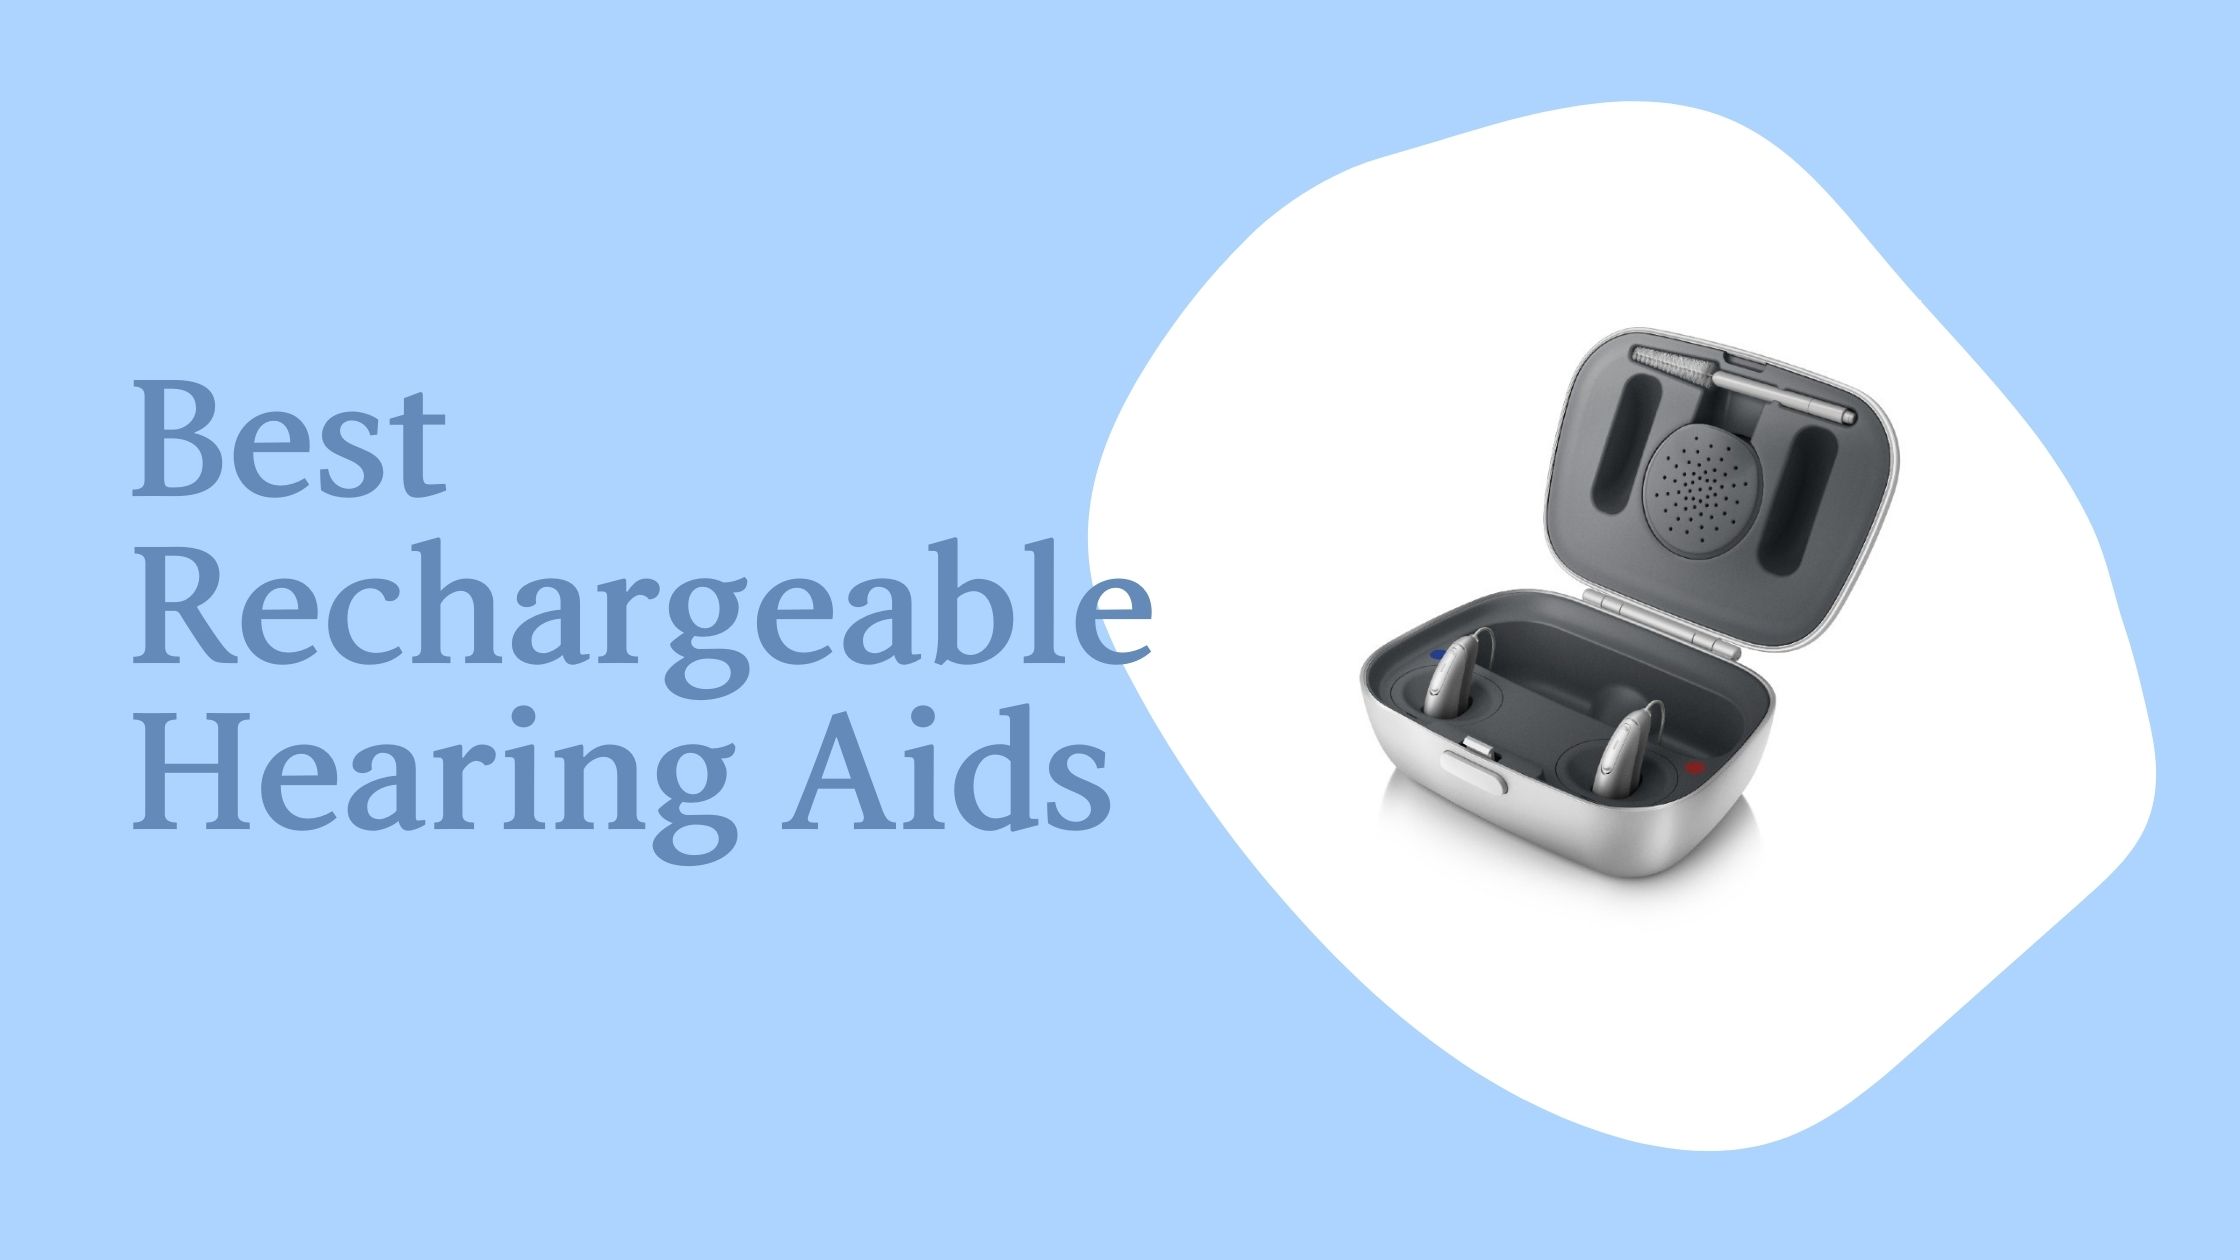 Featured image for “Best Rechargeable Hearing Aids”